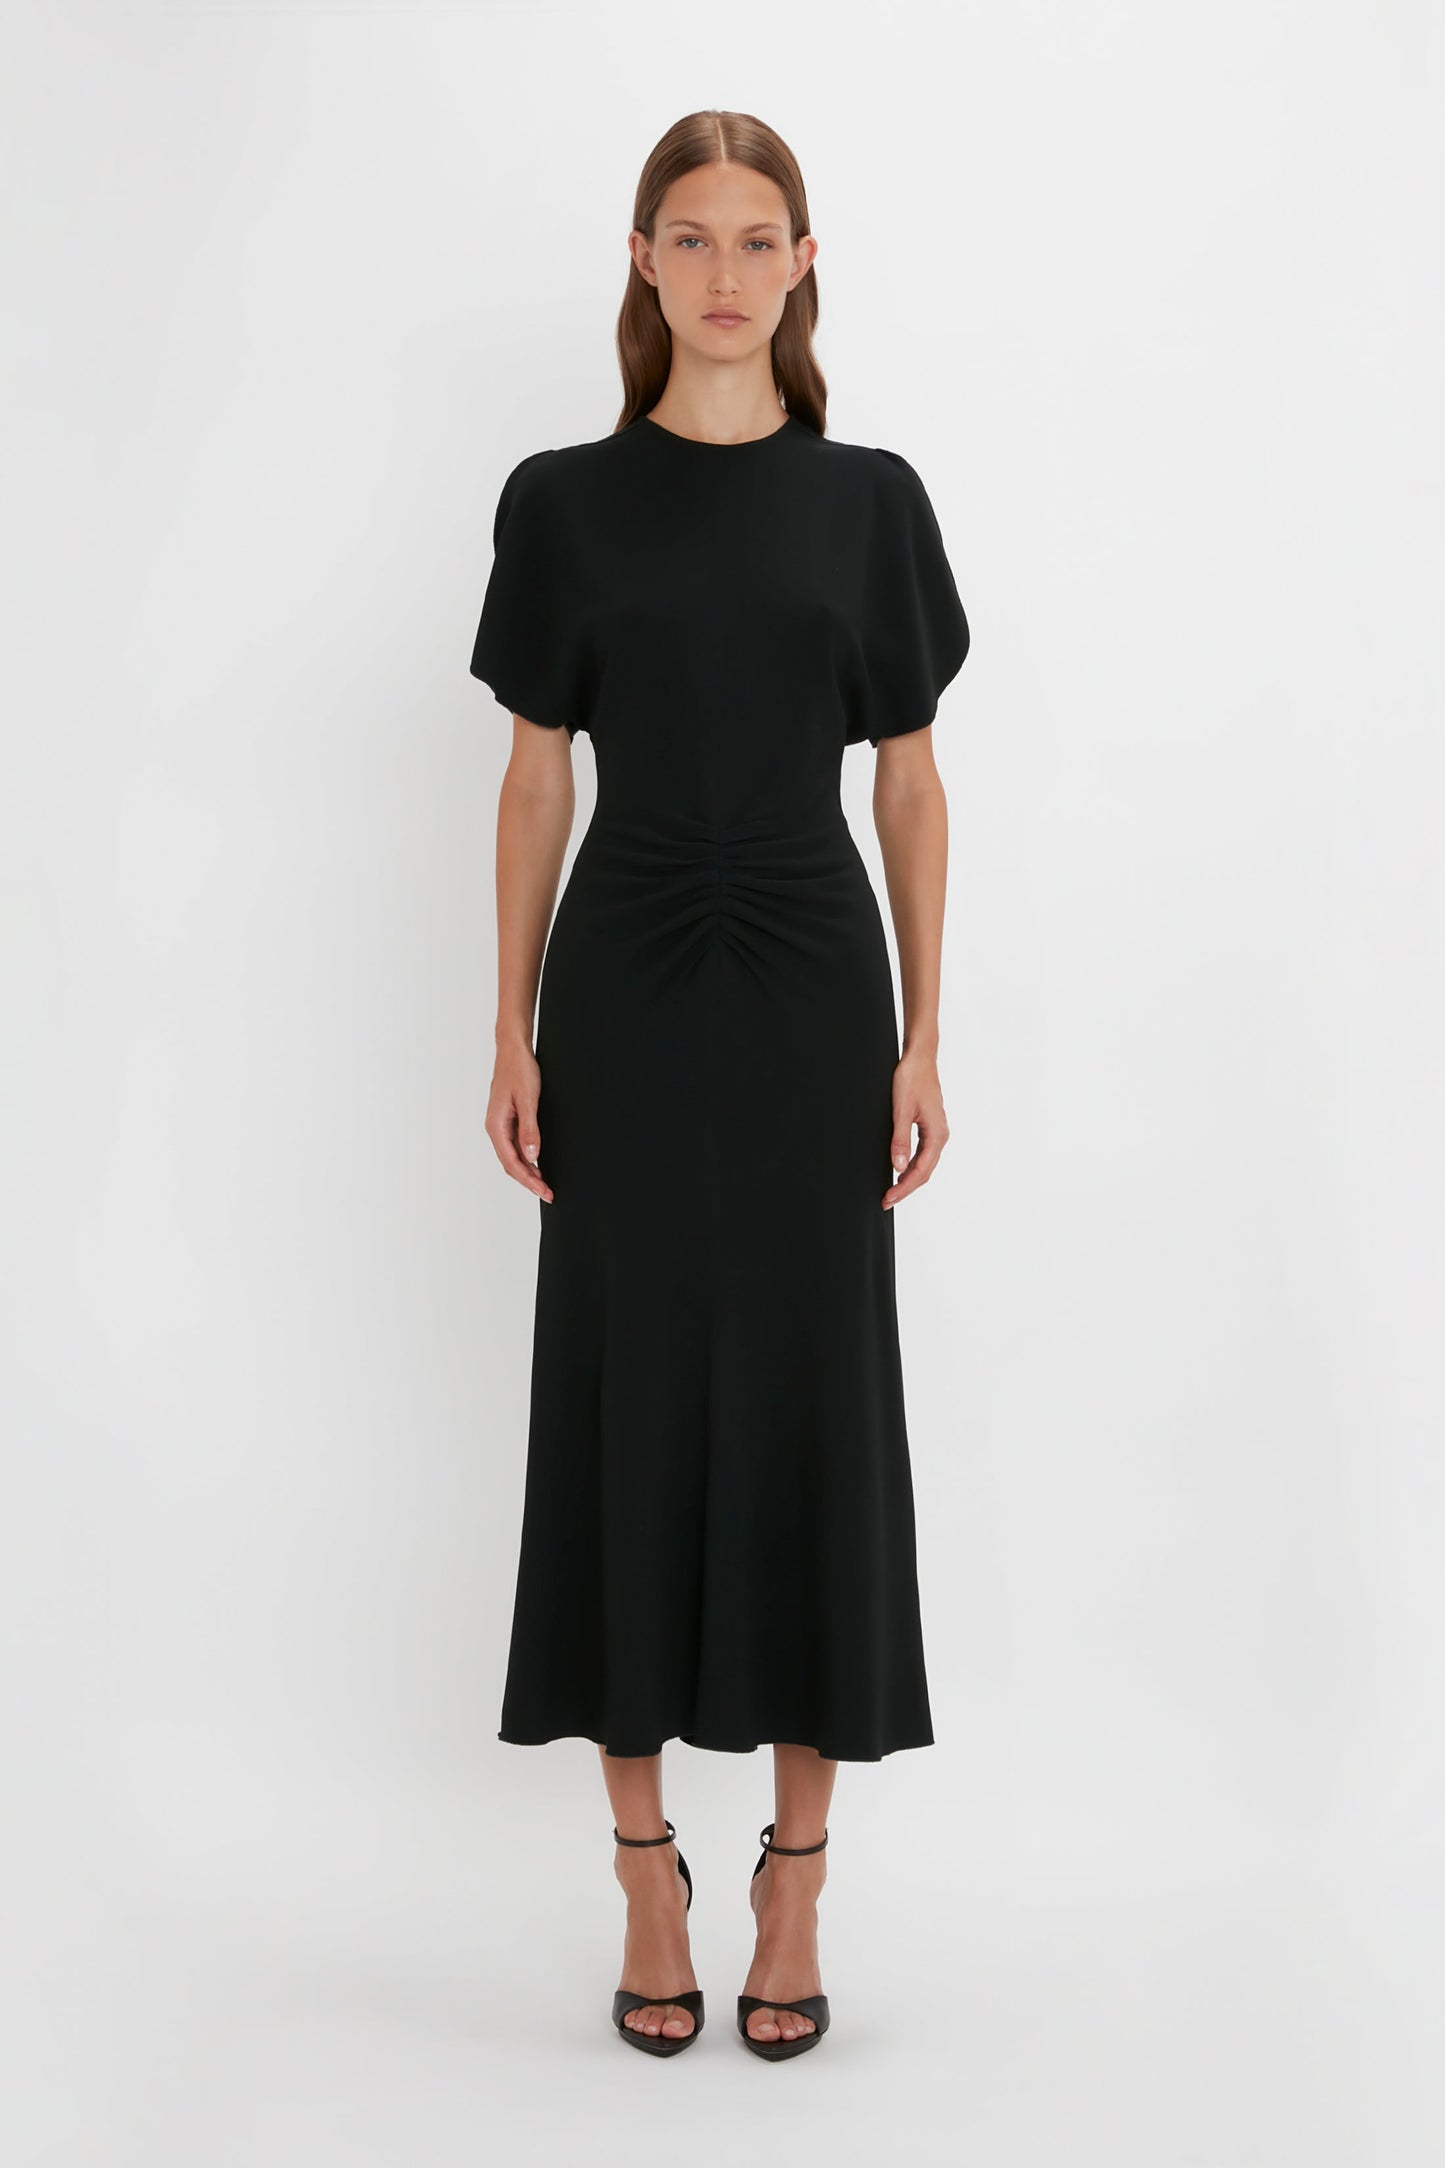 A young woman wearing a black Gathered Waist Midi Dress by Victoria Beckham, with a twisted front detail and short sleeves, standing against a plain white background.